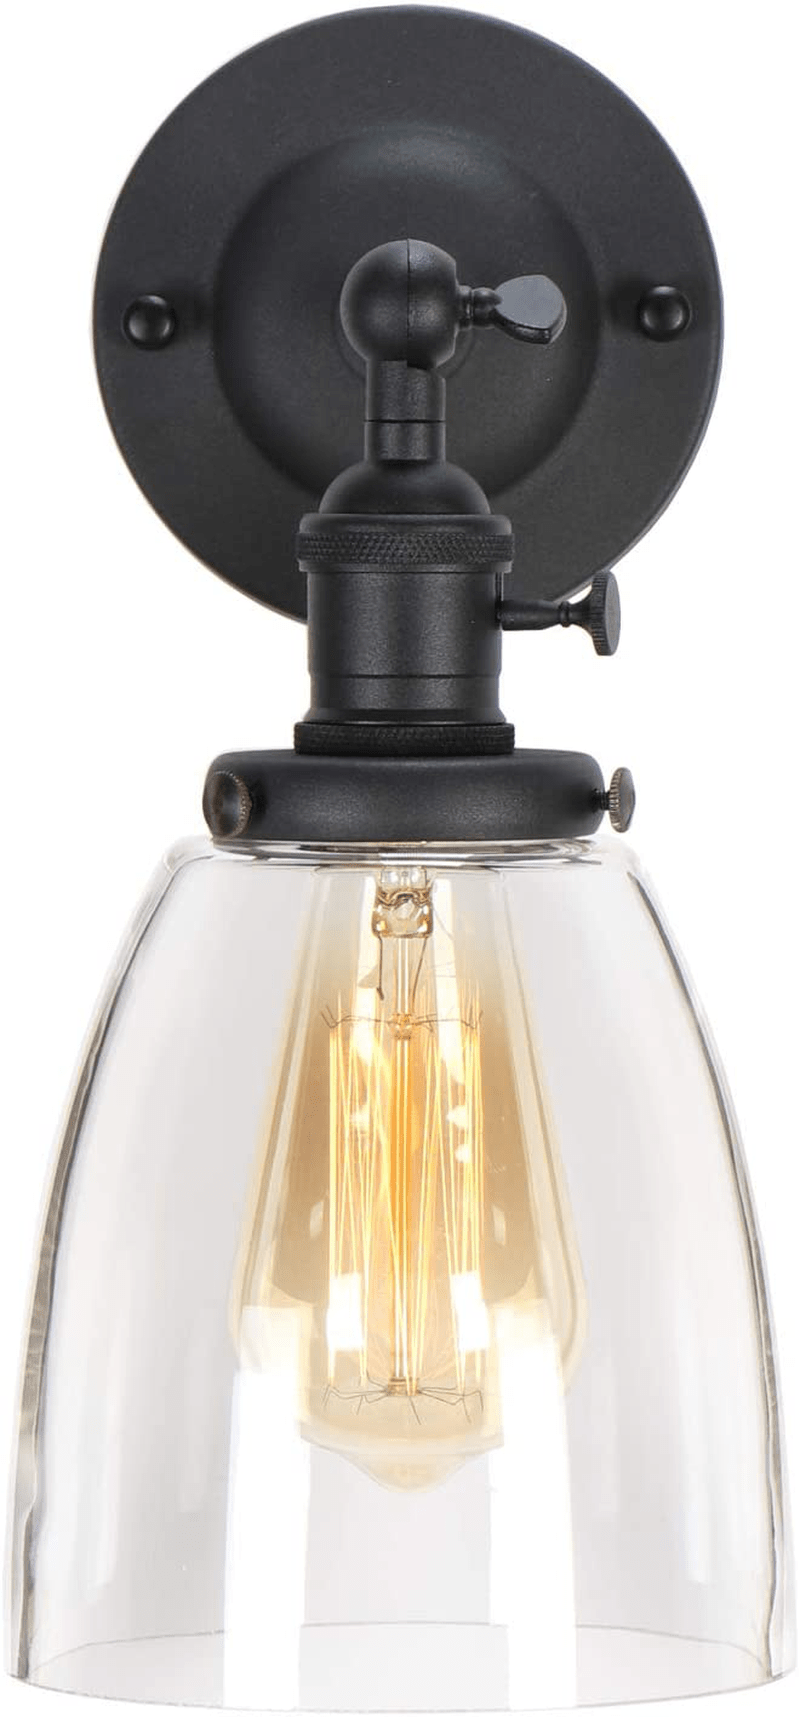 XIDING Premium Industrial Edison Antique Simplicity Glass Wall Sconce Light, Upgrade Black Finish Wall Lamp, On/Off Rotary Switch on Socket Home & Garden > Lighting > Lighting Fixtures > Wall Light Fixtures KOL DEALS   